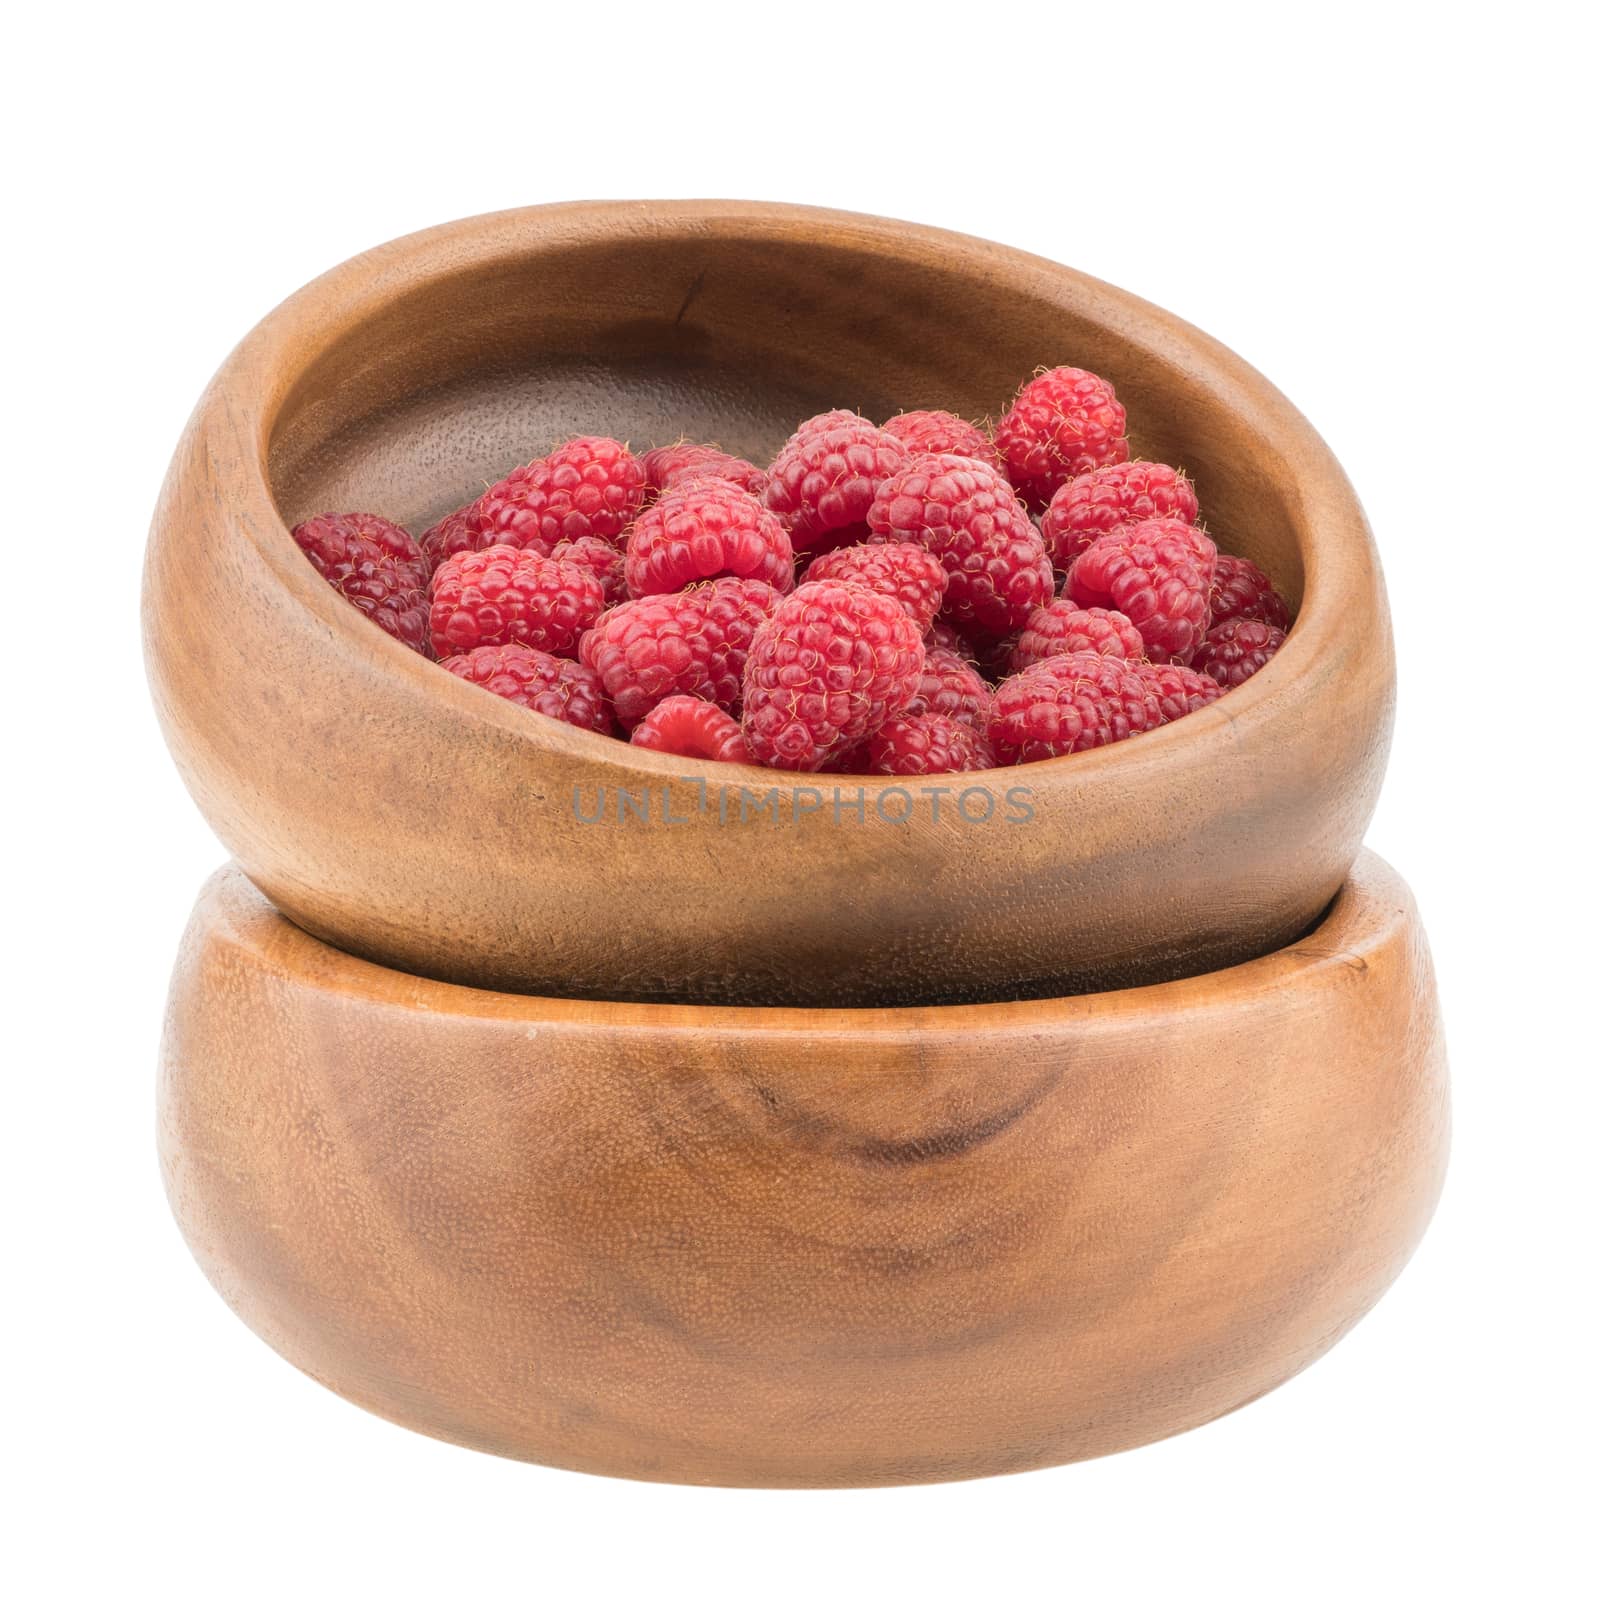 Raspberries in a wooden bowl. Ripe and tasty raspberries isolated on white background. Selective focus.